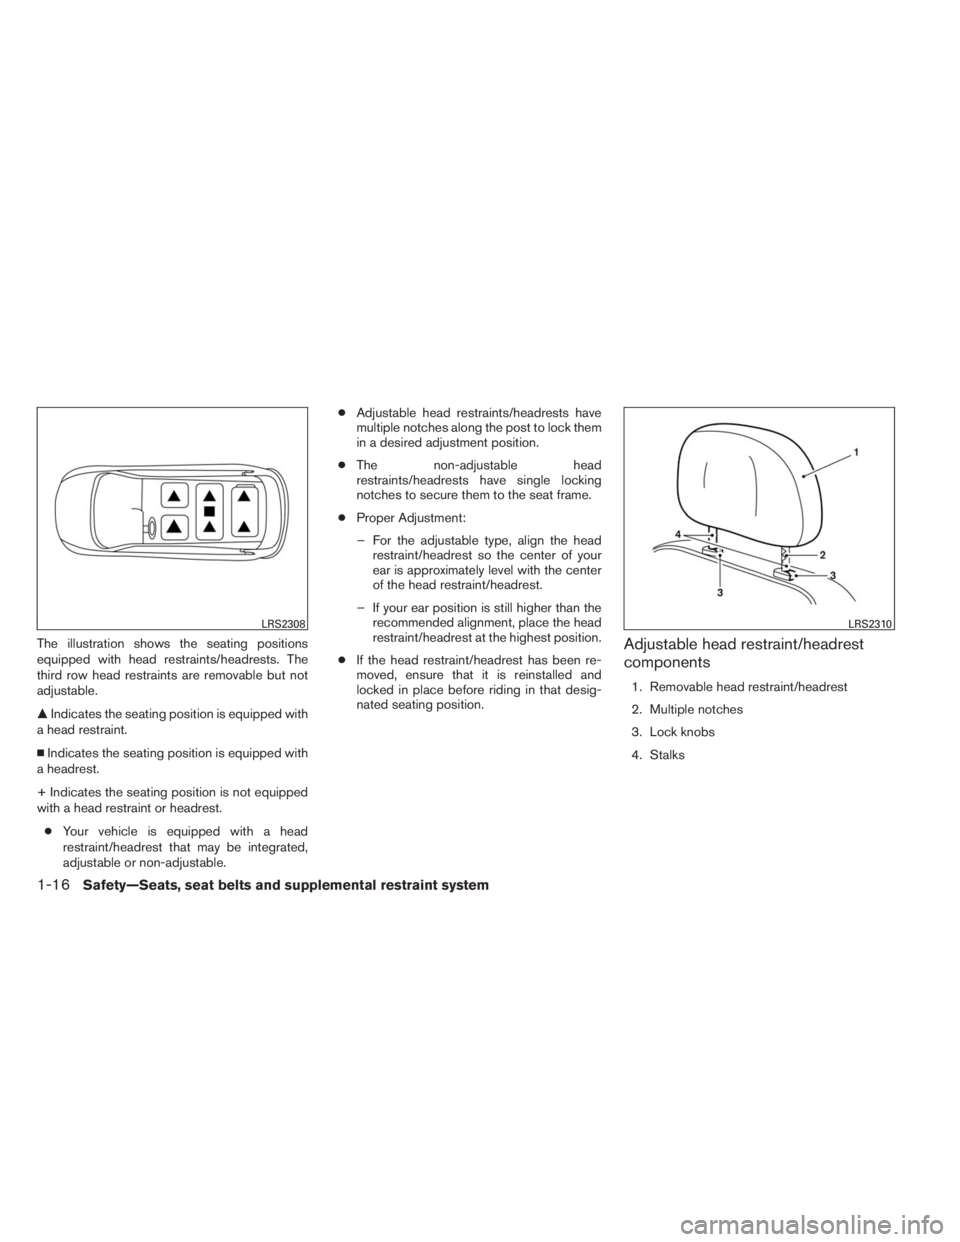 INFINITI QX60 2014 Owners Guide The illustration shows the seating positions
equipped with head restraints/headrests. The
third row head restraints are removable but not
adjustable.
Indicates the seating position is equipped with
a